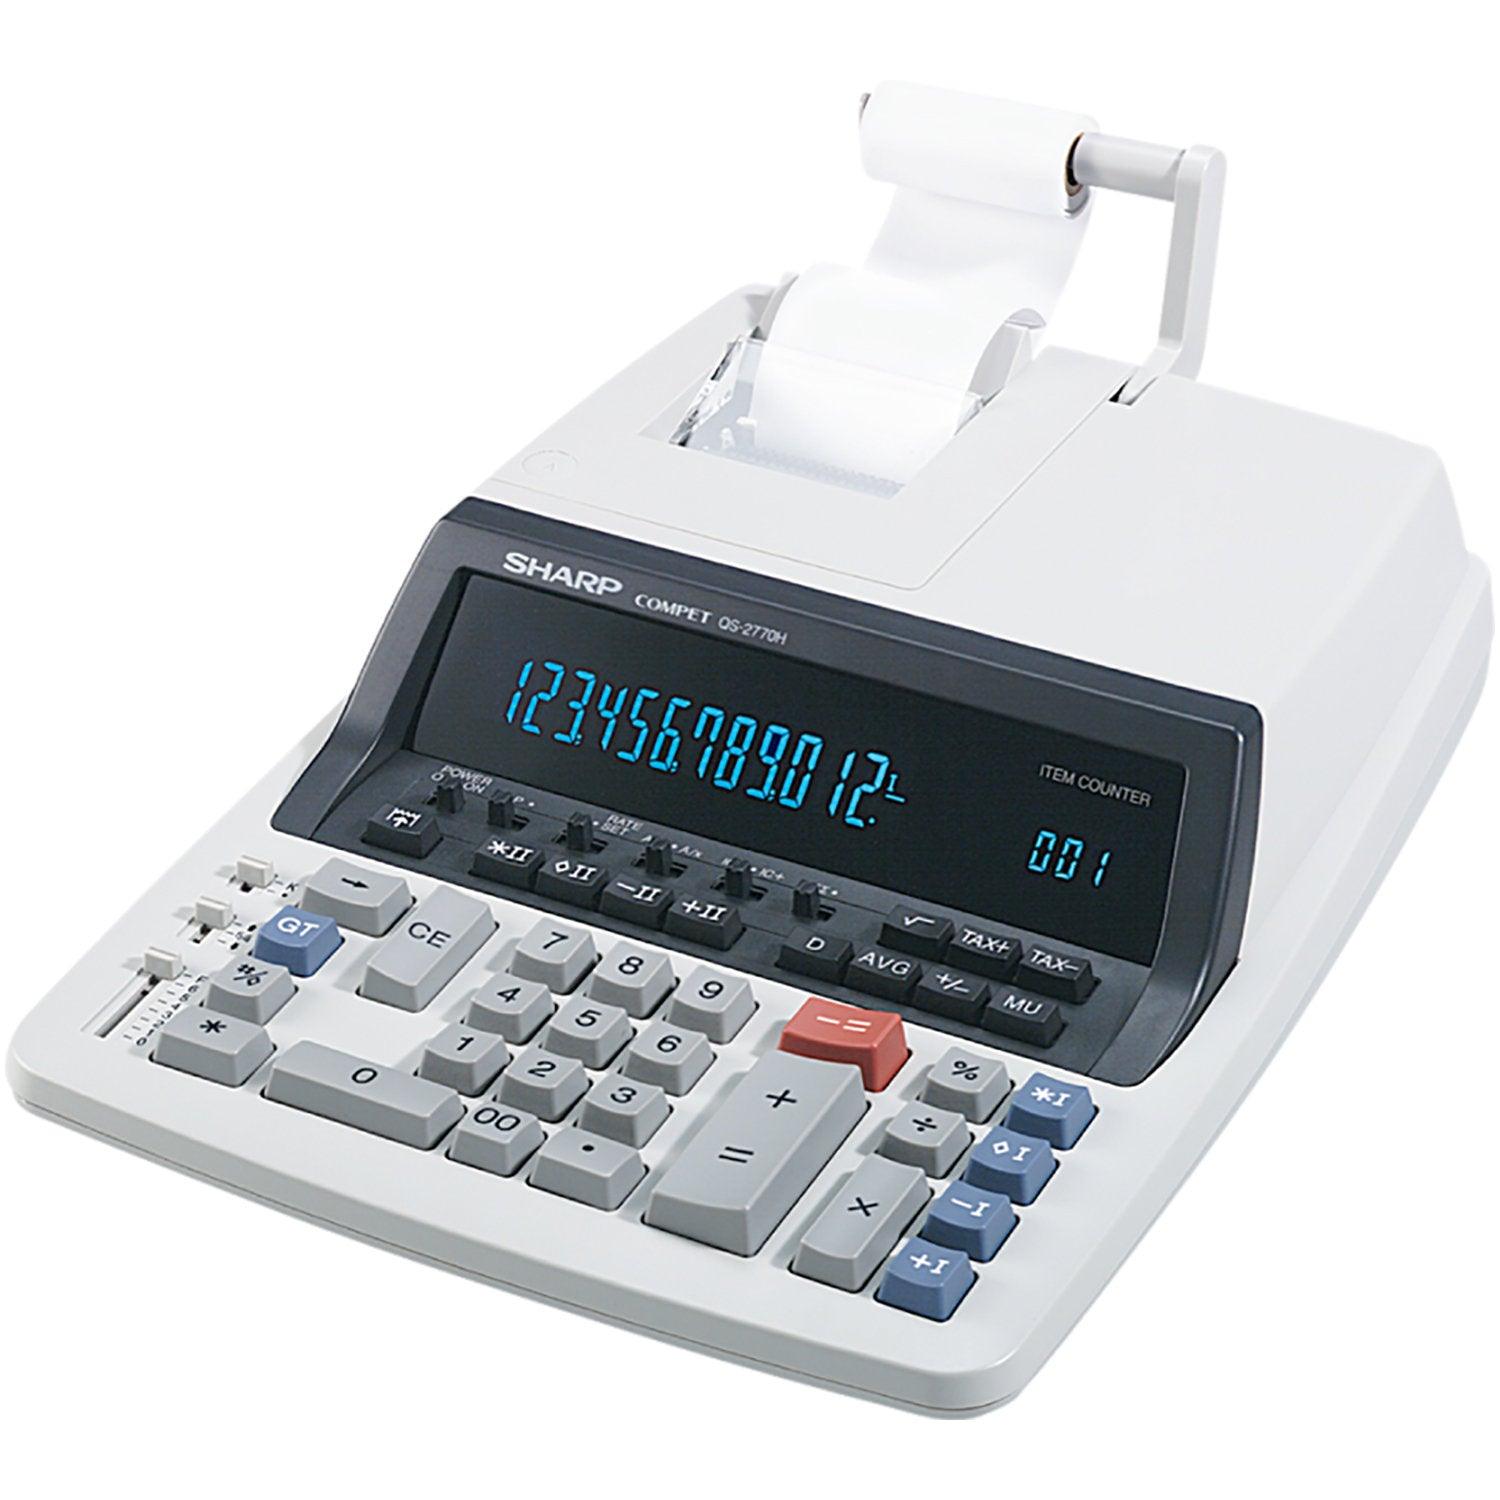 Sharp QS2770H - 12 Digit Professional Heavy Duty Commercial Printing Calculator - Underwood Distributing Co.